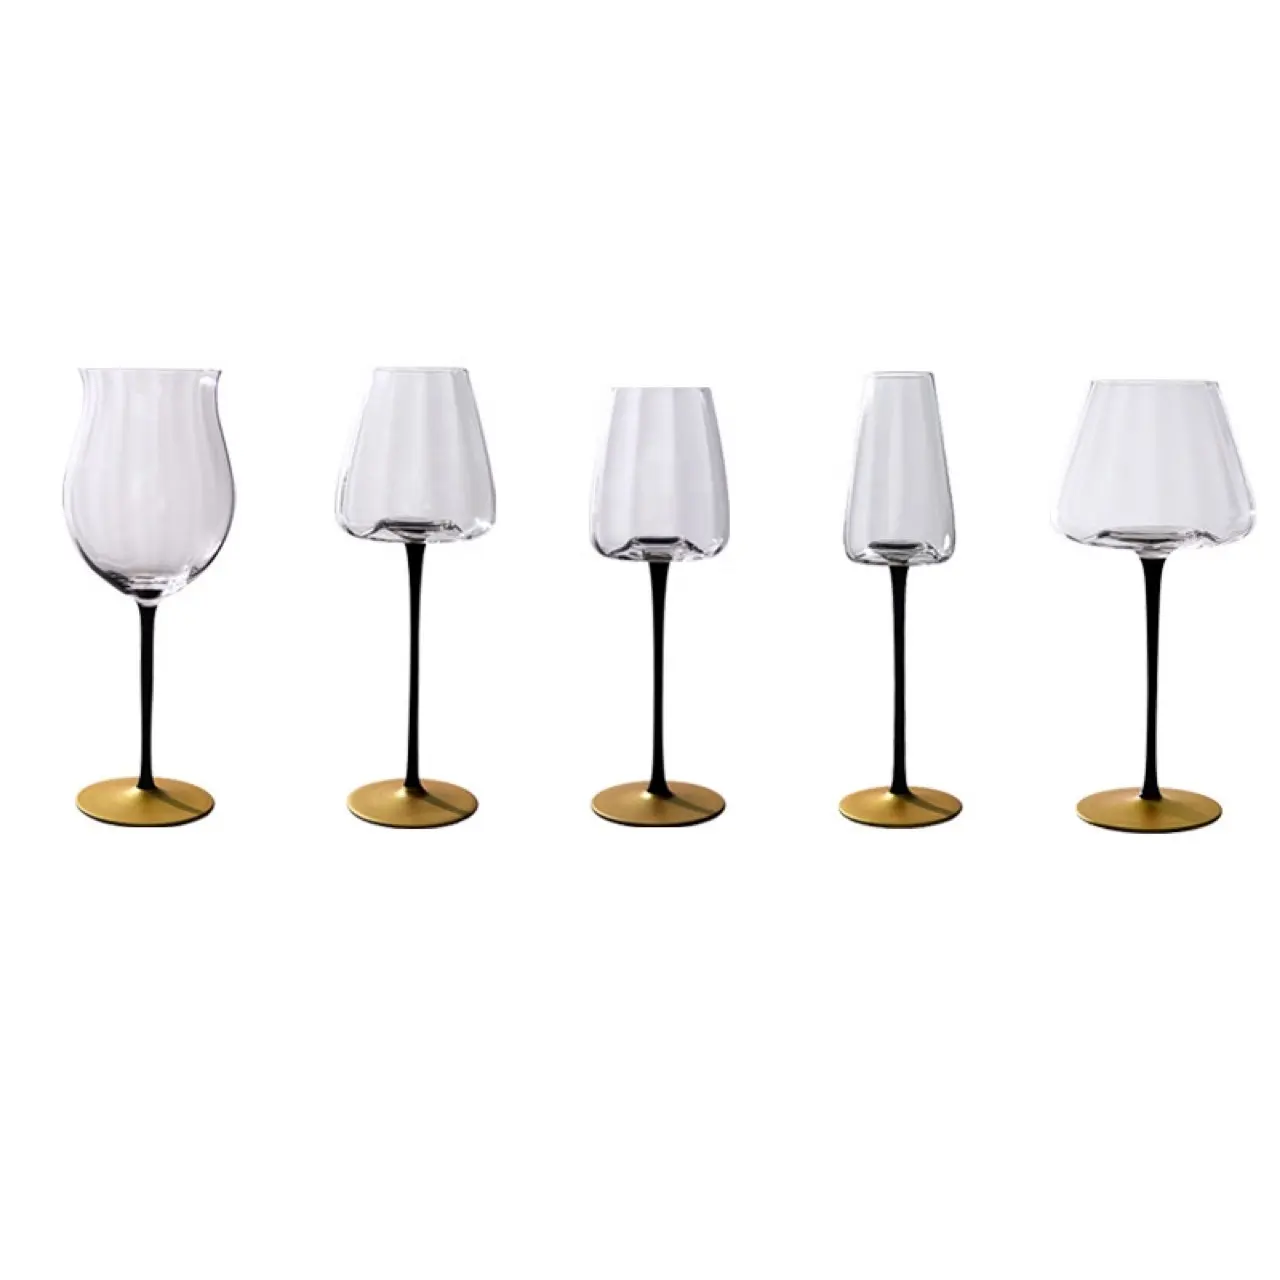 Black Match Gold Crystal Glass Wine Glass Upscale Light Luxury Wind Champagne Cup Household Tall Glass